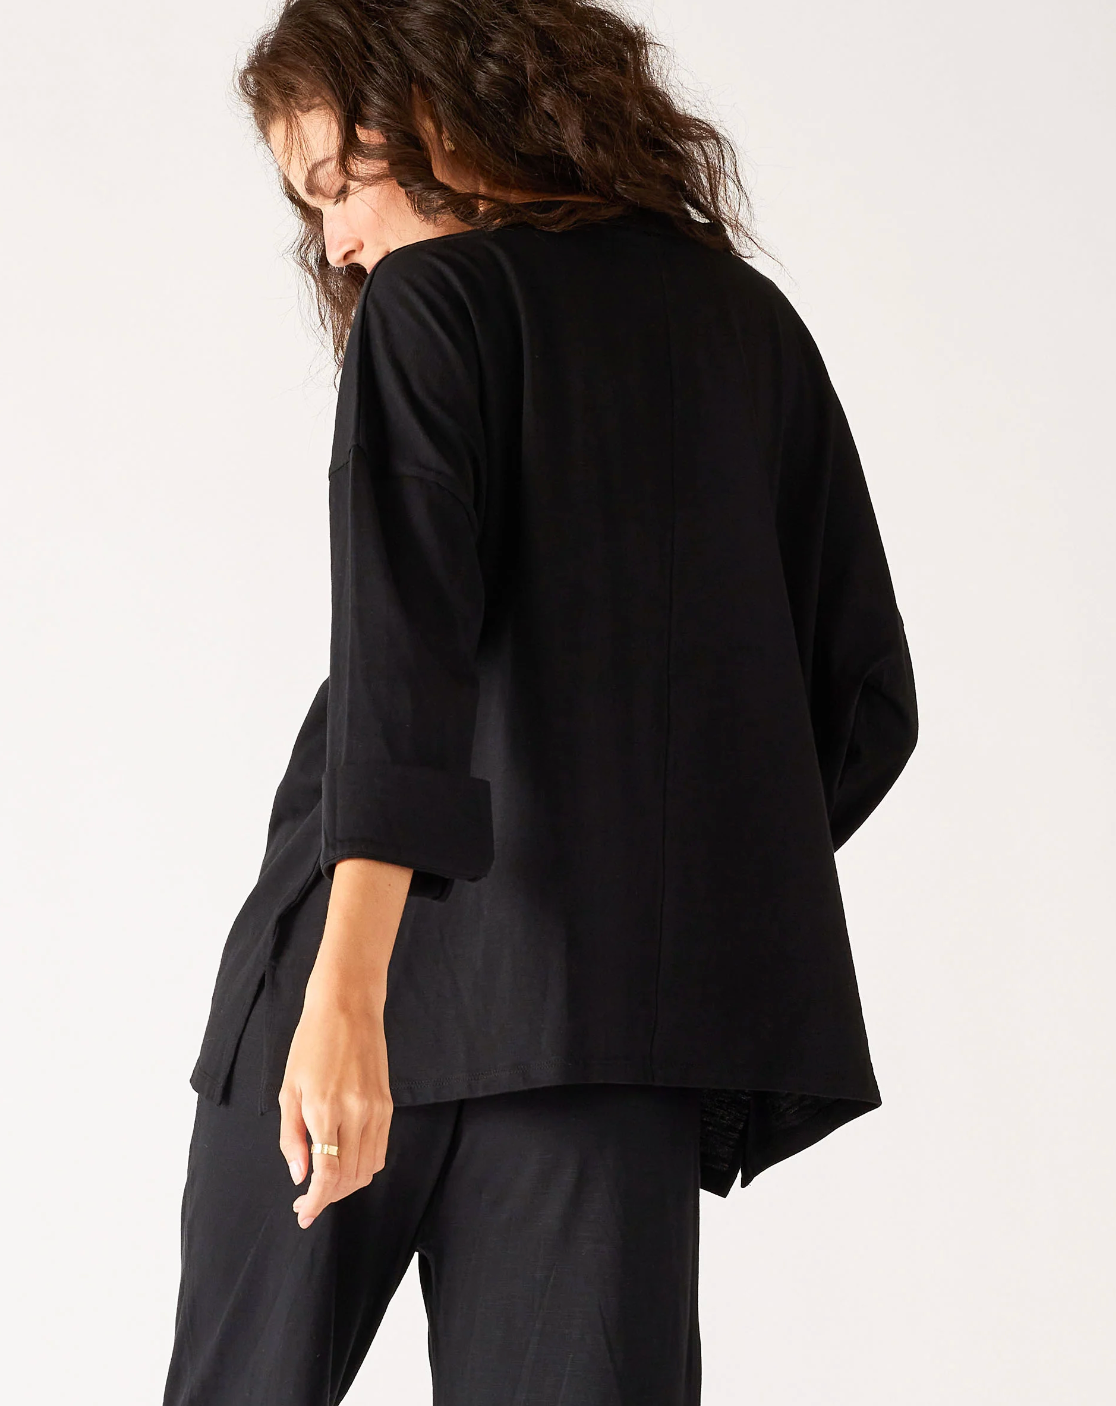 Amelia Long Sleeve Tee in Black - The French Shoppe